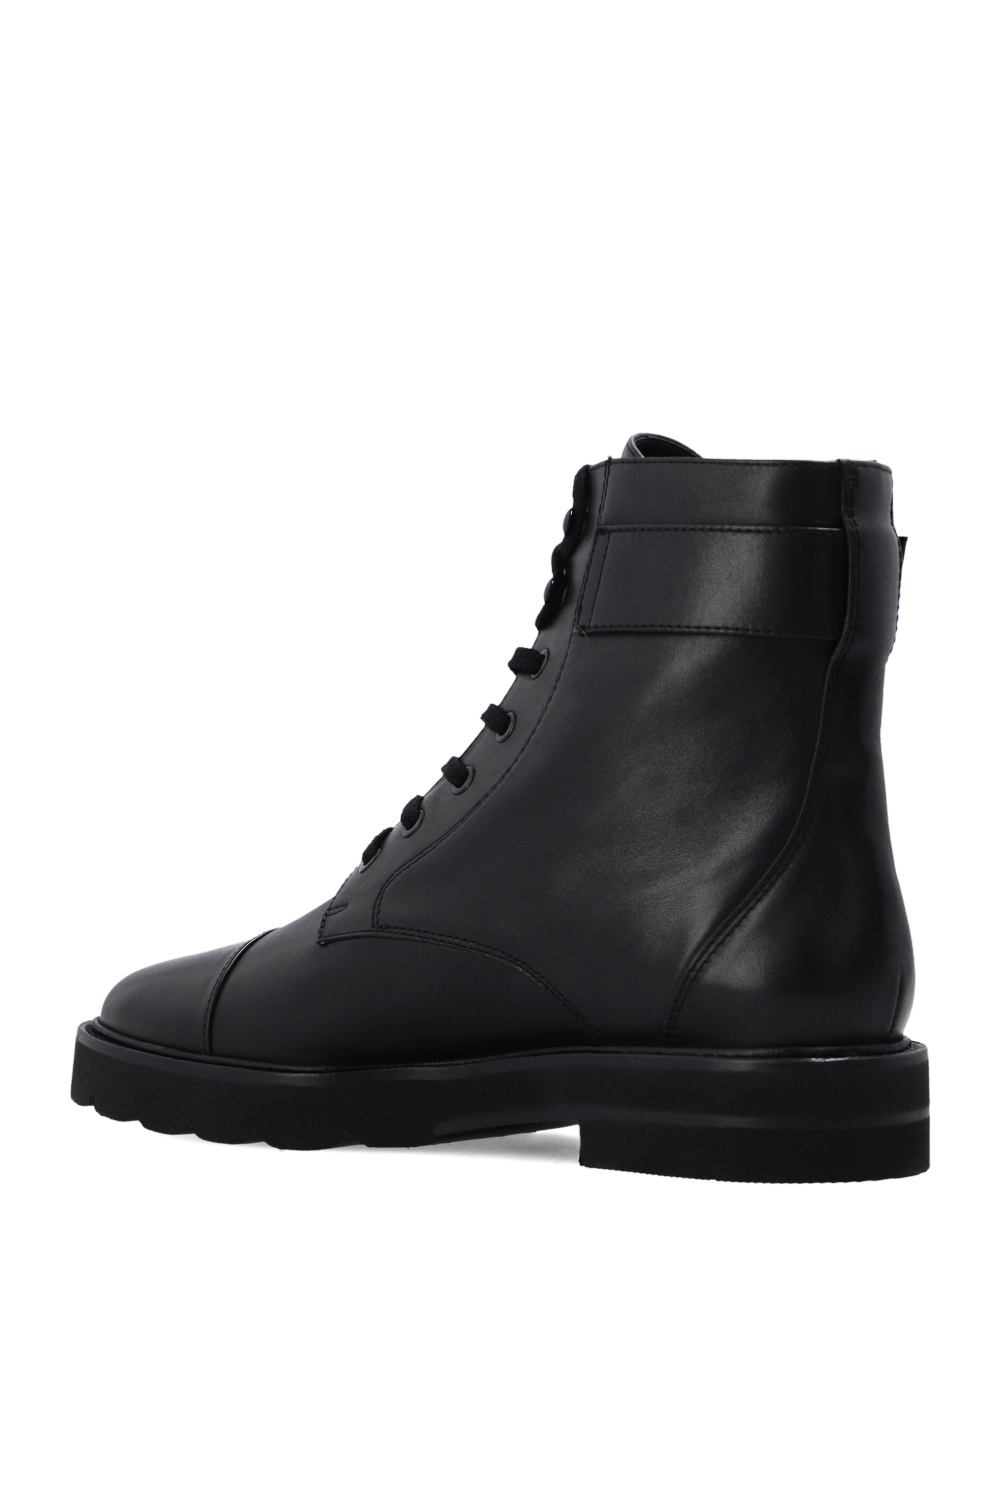 Stuart Weitzman ‘Piper’ lace-up ankle boots